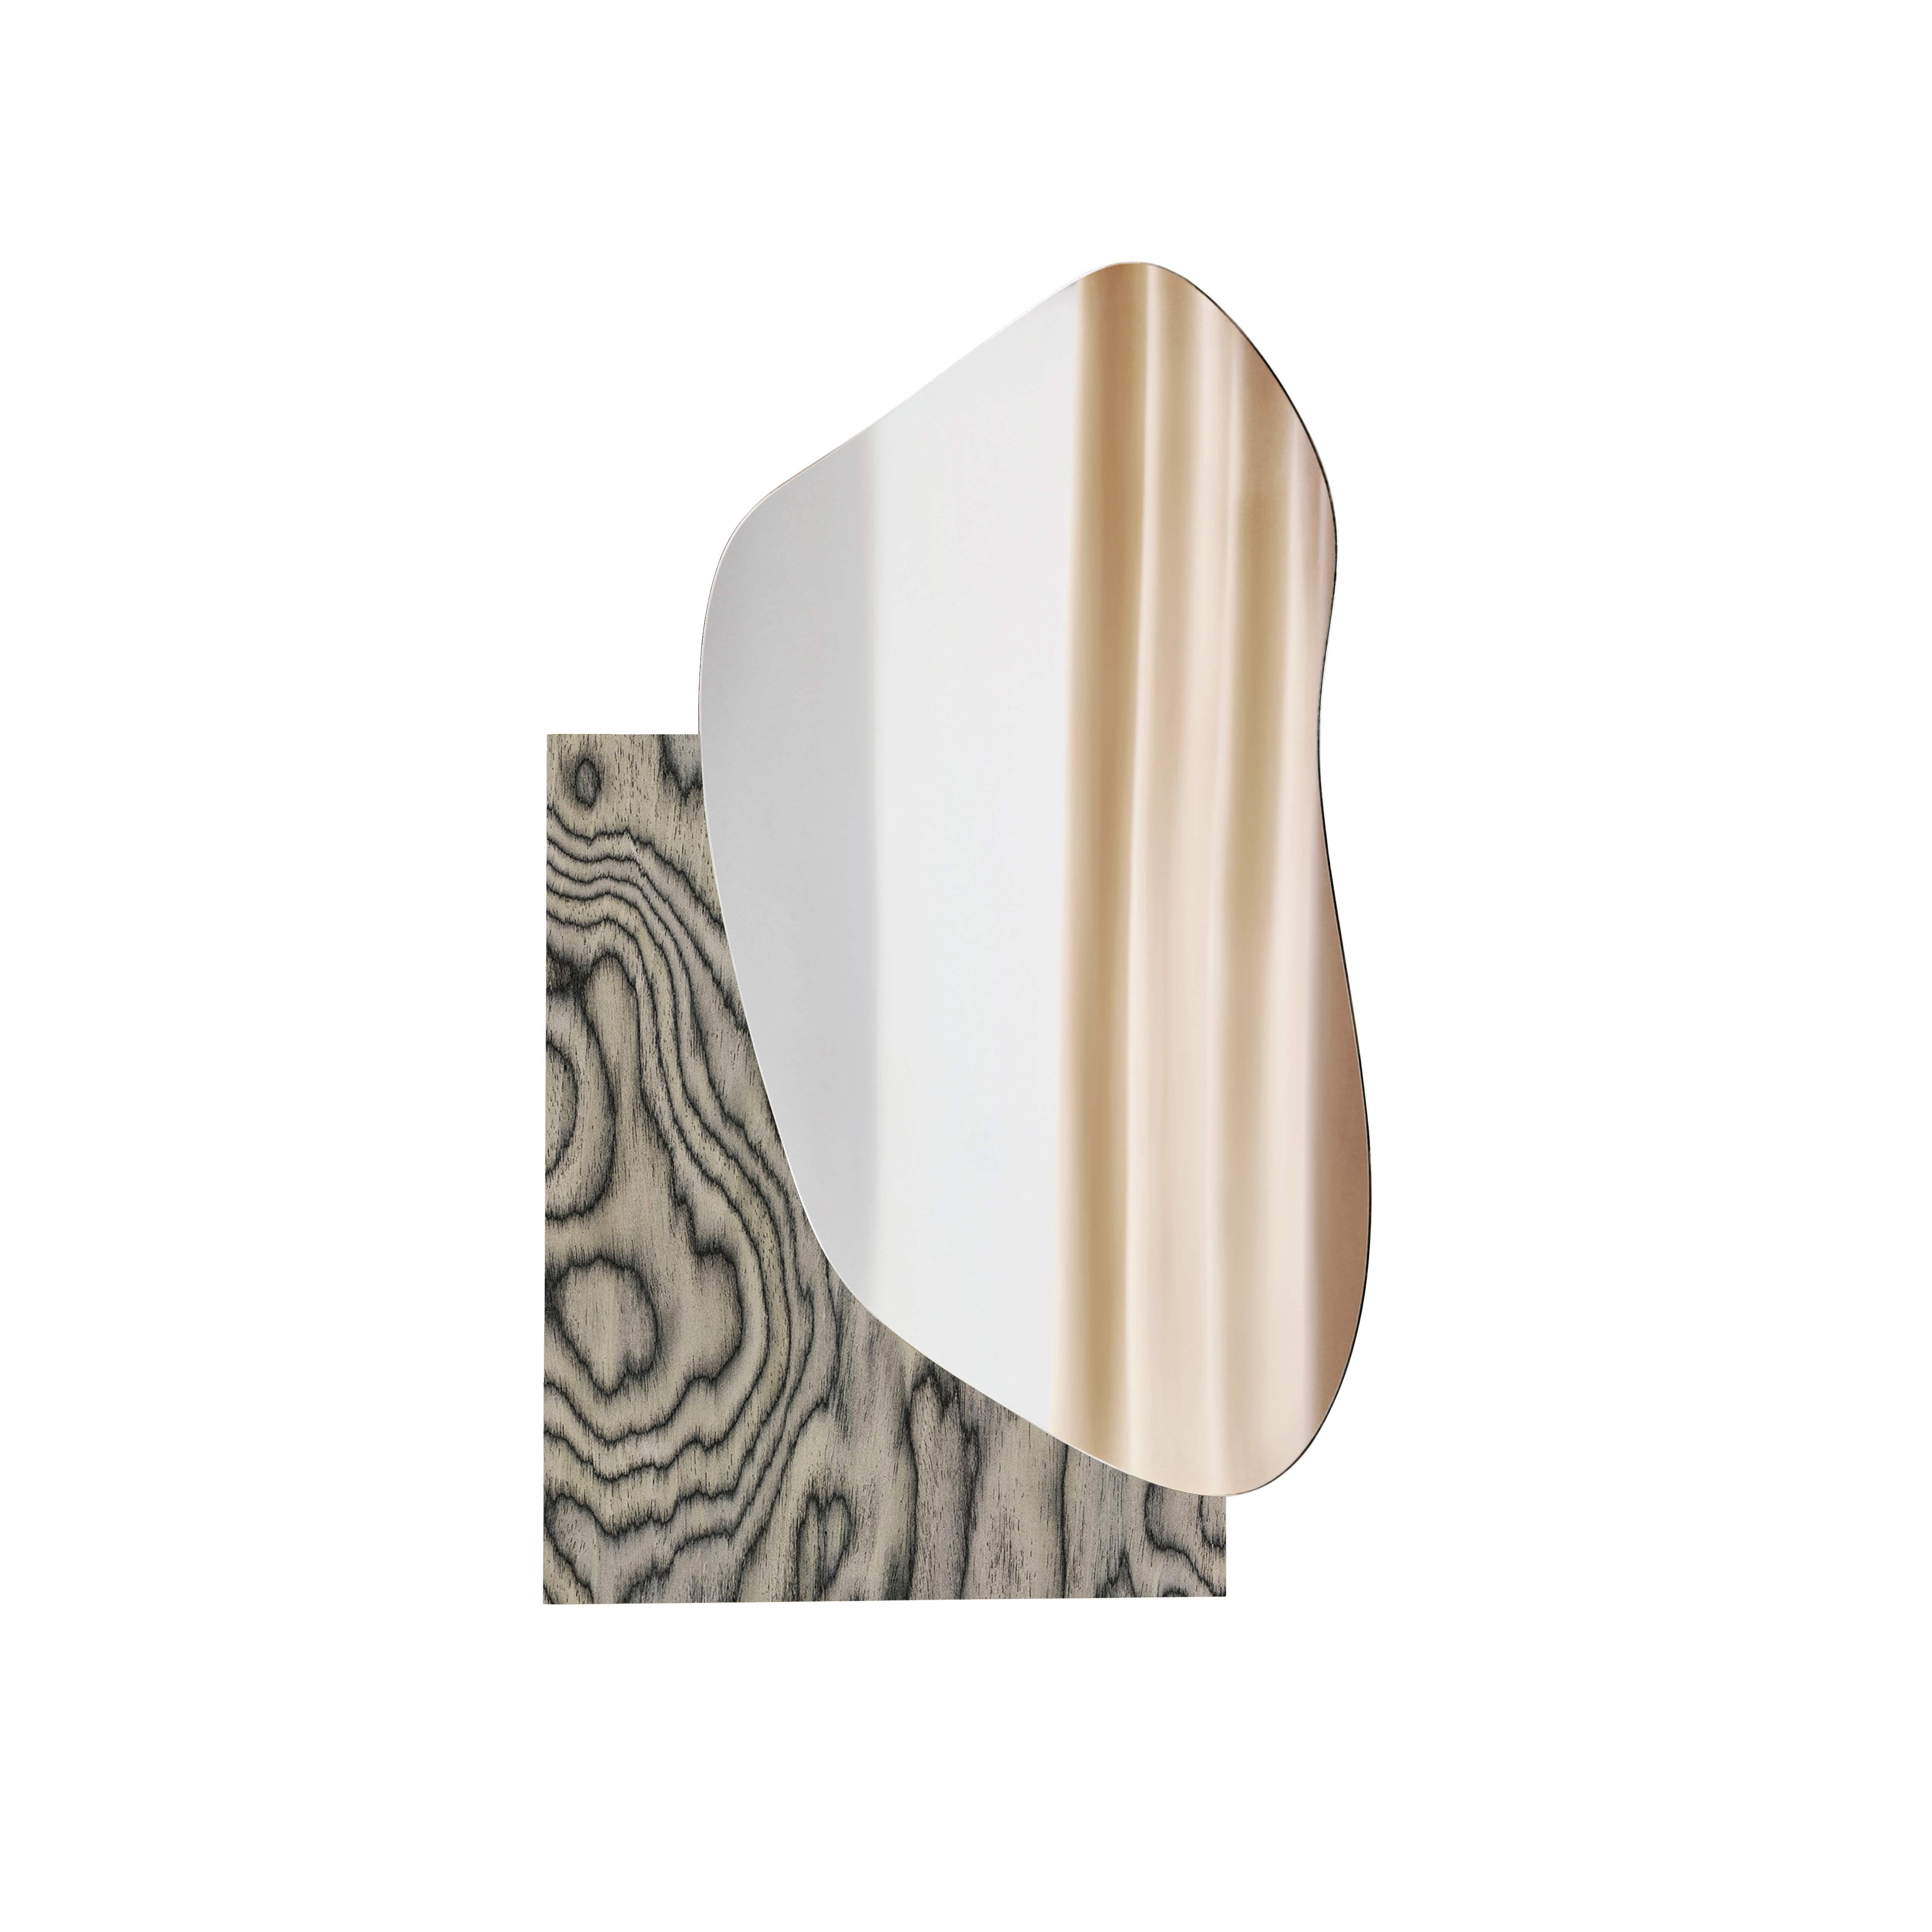 Contemporary Modern Wall Mirror Lake 1 by Noom in Ettore Sottsass ALPI Wood Veneer